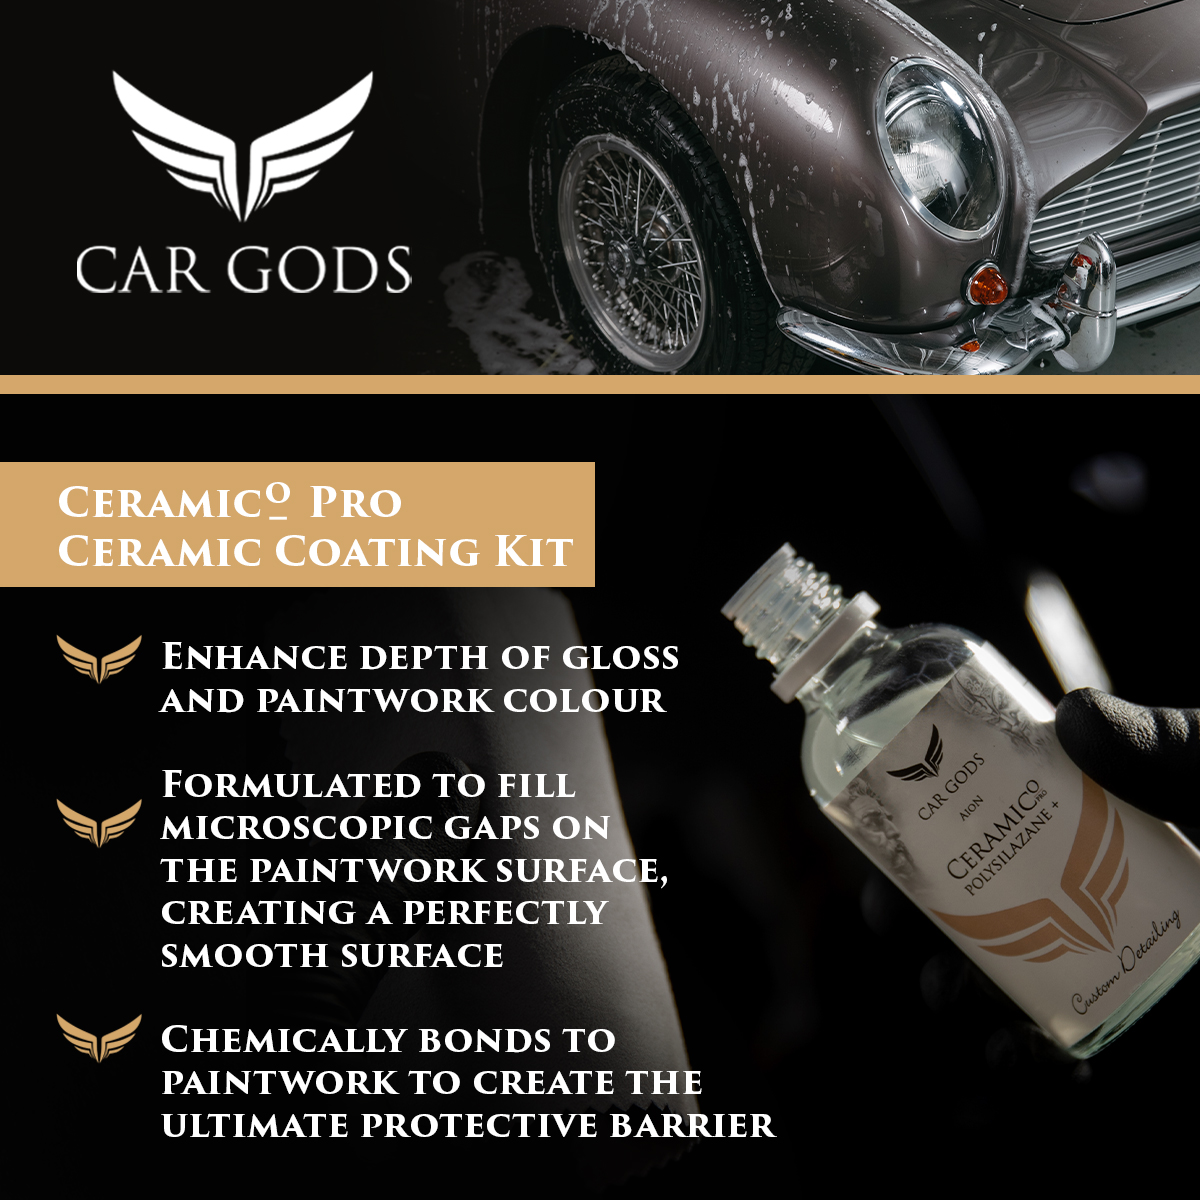 Car Gods Ceramico Pro Ceramic Coating Kit. Enhance depth of gloss and paintwork colour and create a perfectly smooth paintwork surface. The super durable polymer coating lasts up to 3 years with the correct application, and chemically bonds to paintwork to create the ultimate protective hydrophobic barrier.